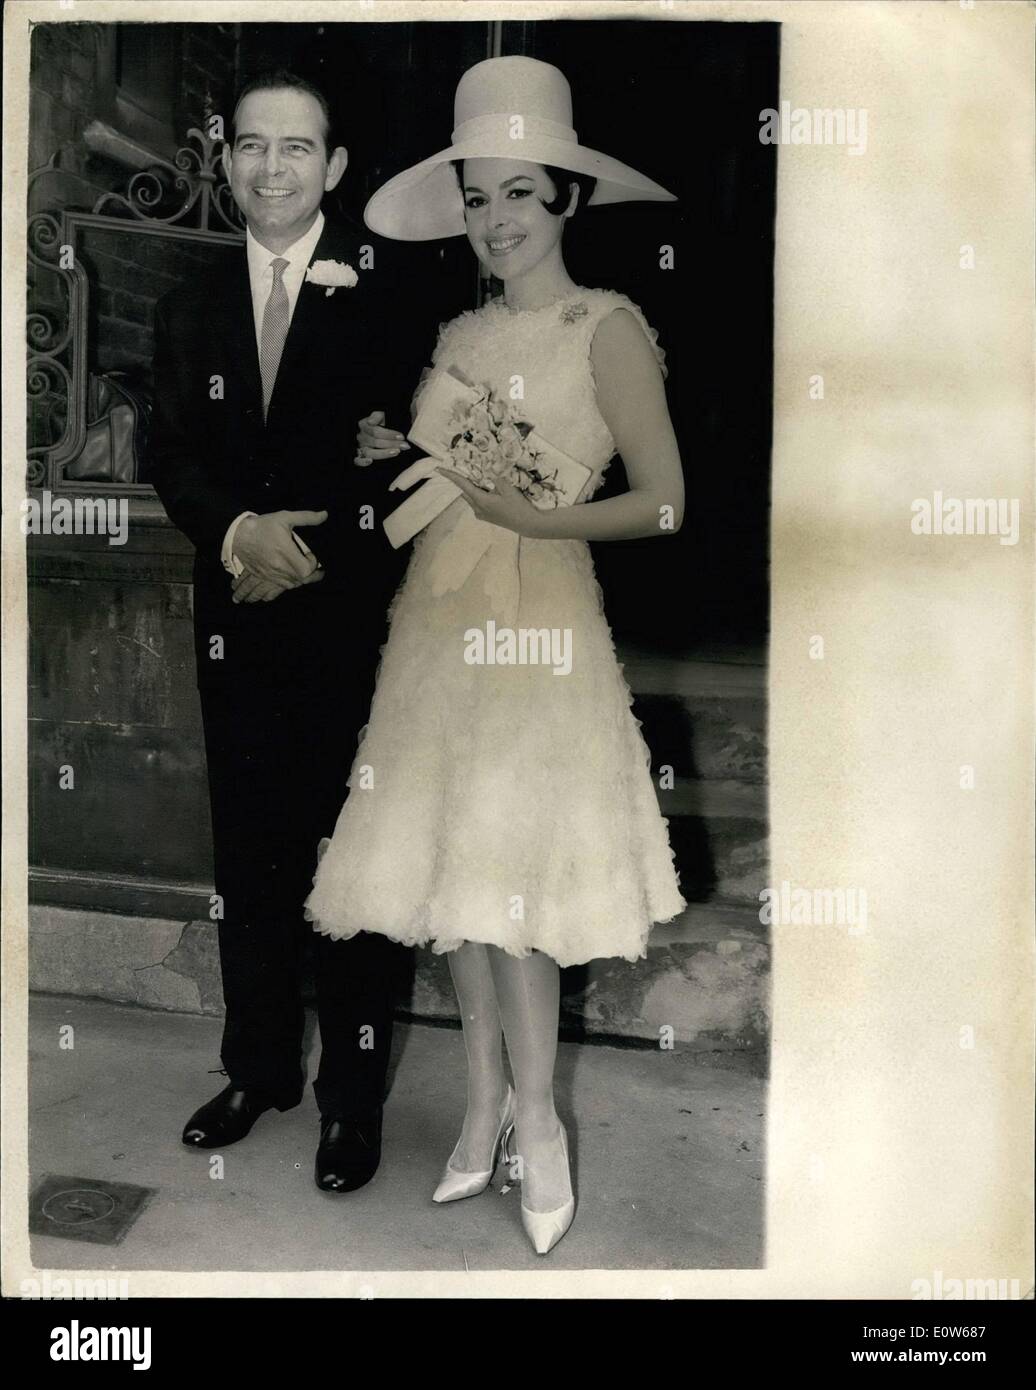 Aug. 08, 1961 - Actress Mara Lane marries Texas oil man Thirty - year old film actress Mara lane this afternoon wed William Dugger, 38, a San Antonio, Texas, oil man, at Hal, London. photo shows The bride and groom after the ceremony. Stock Photo